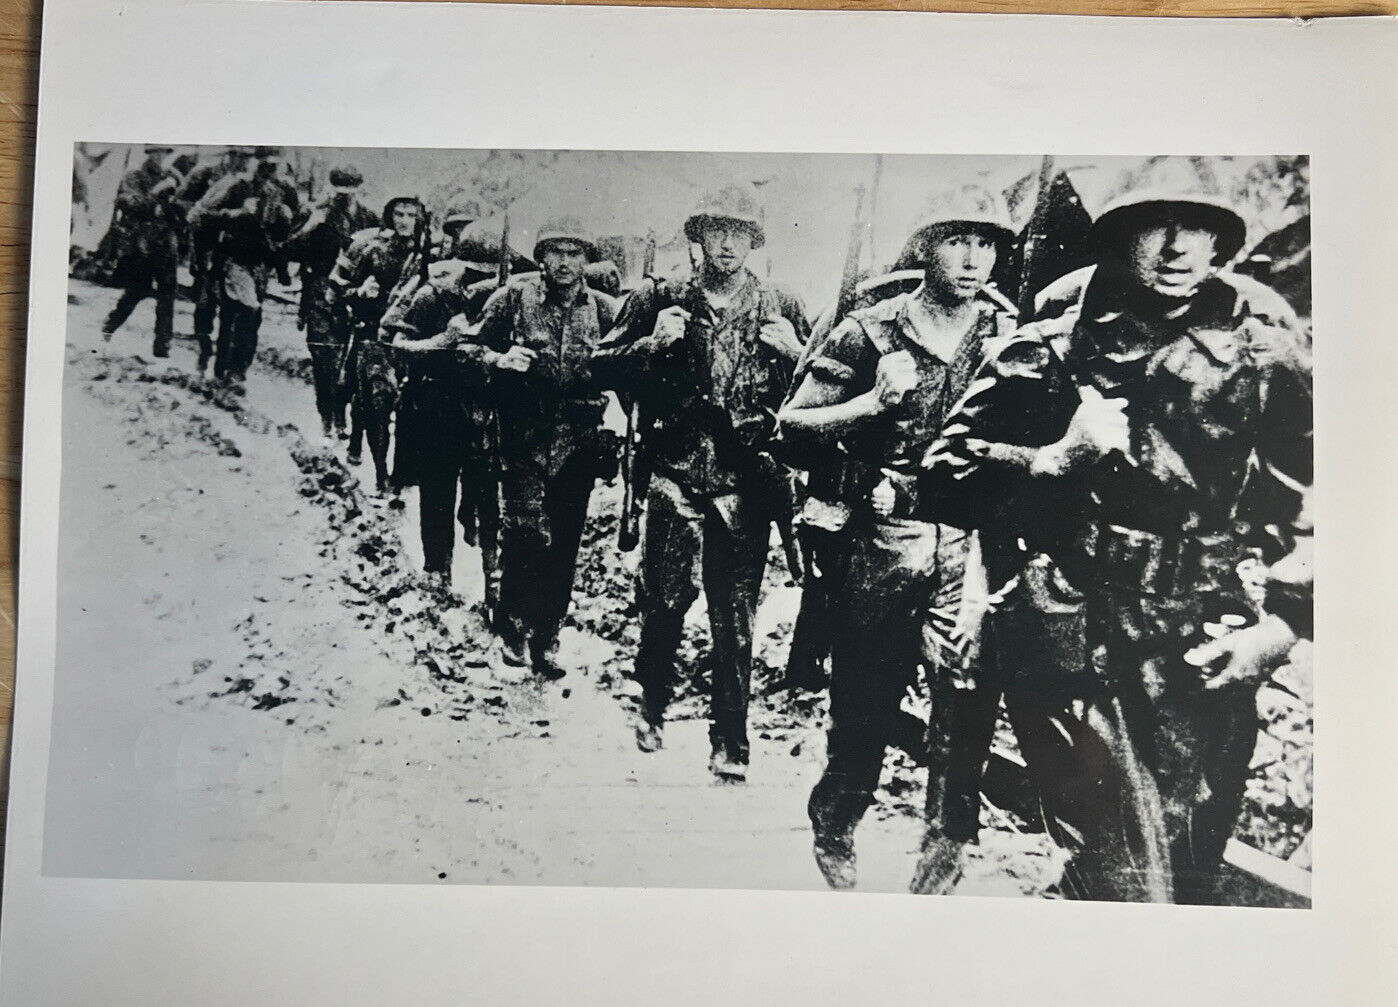 ANTIQUE WWII ORIGINAL PHOTOGRAPH OF SOLDIER\'S MARCHING DURING WWII